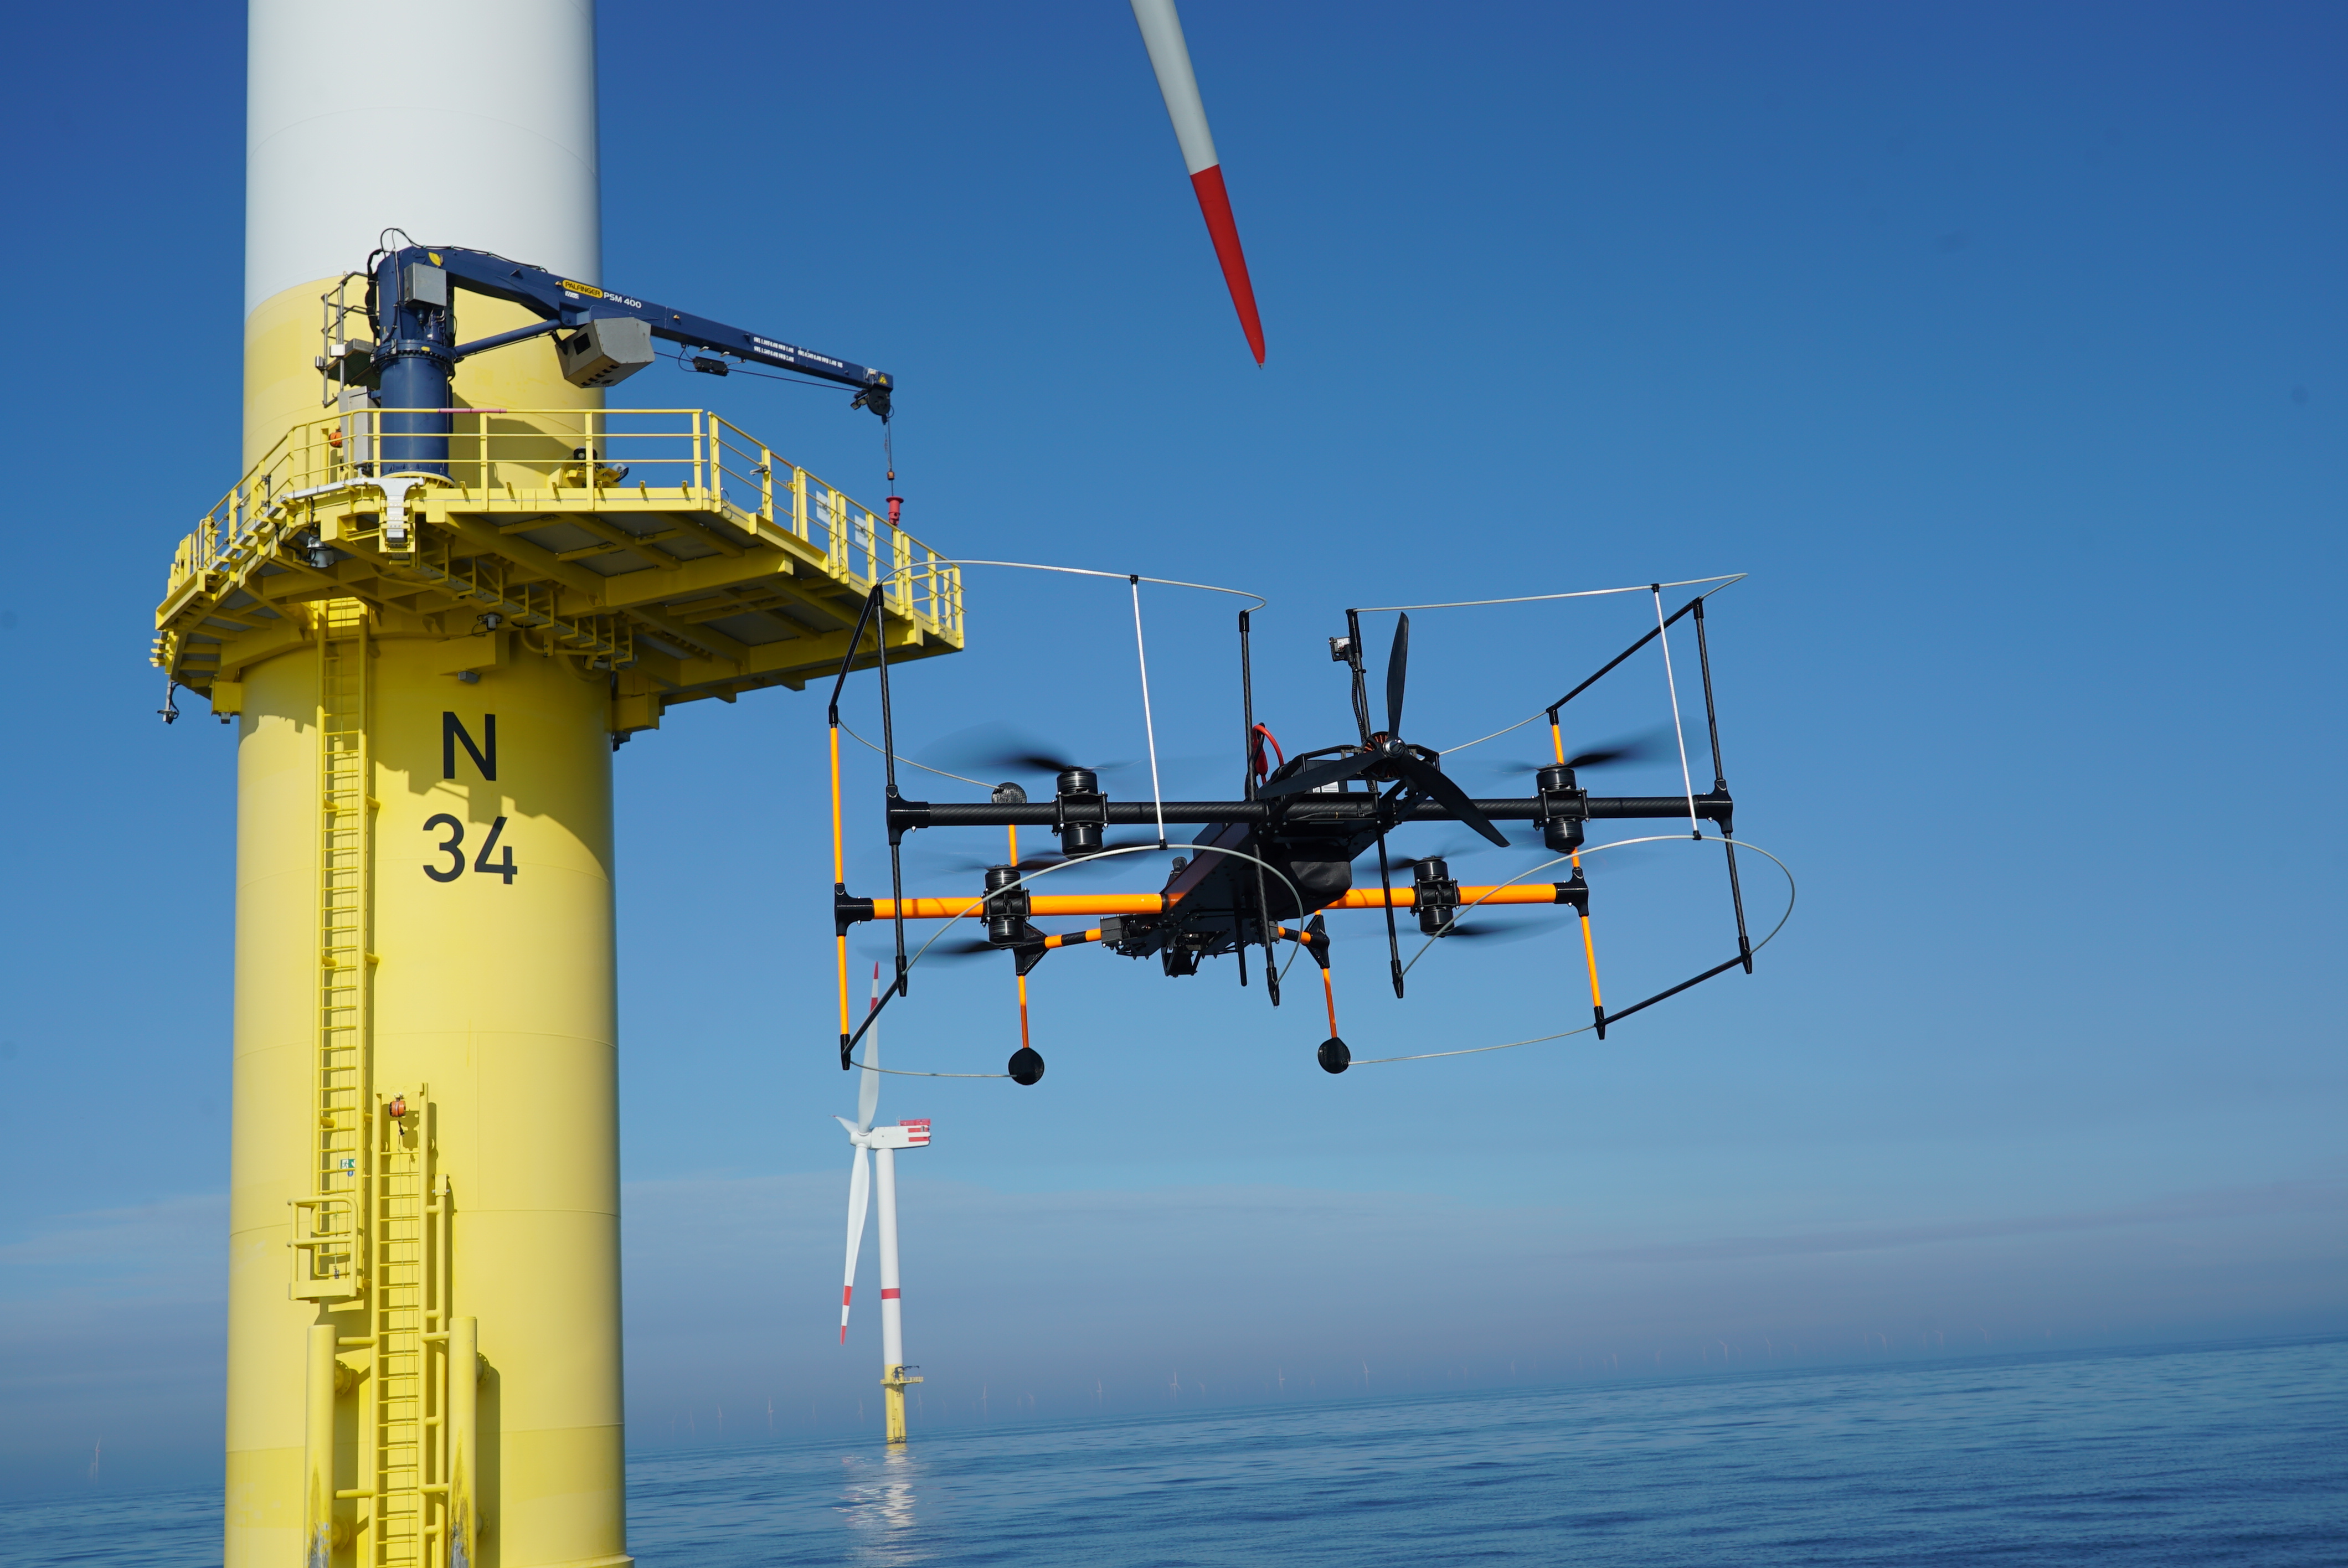 UAS deployment for the inspection of an offshore wind turbine as part of the AIDA research project